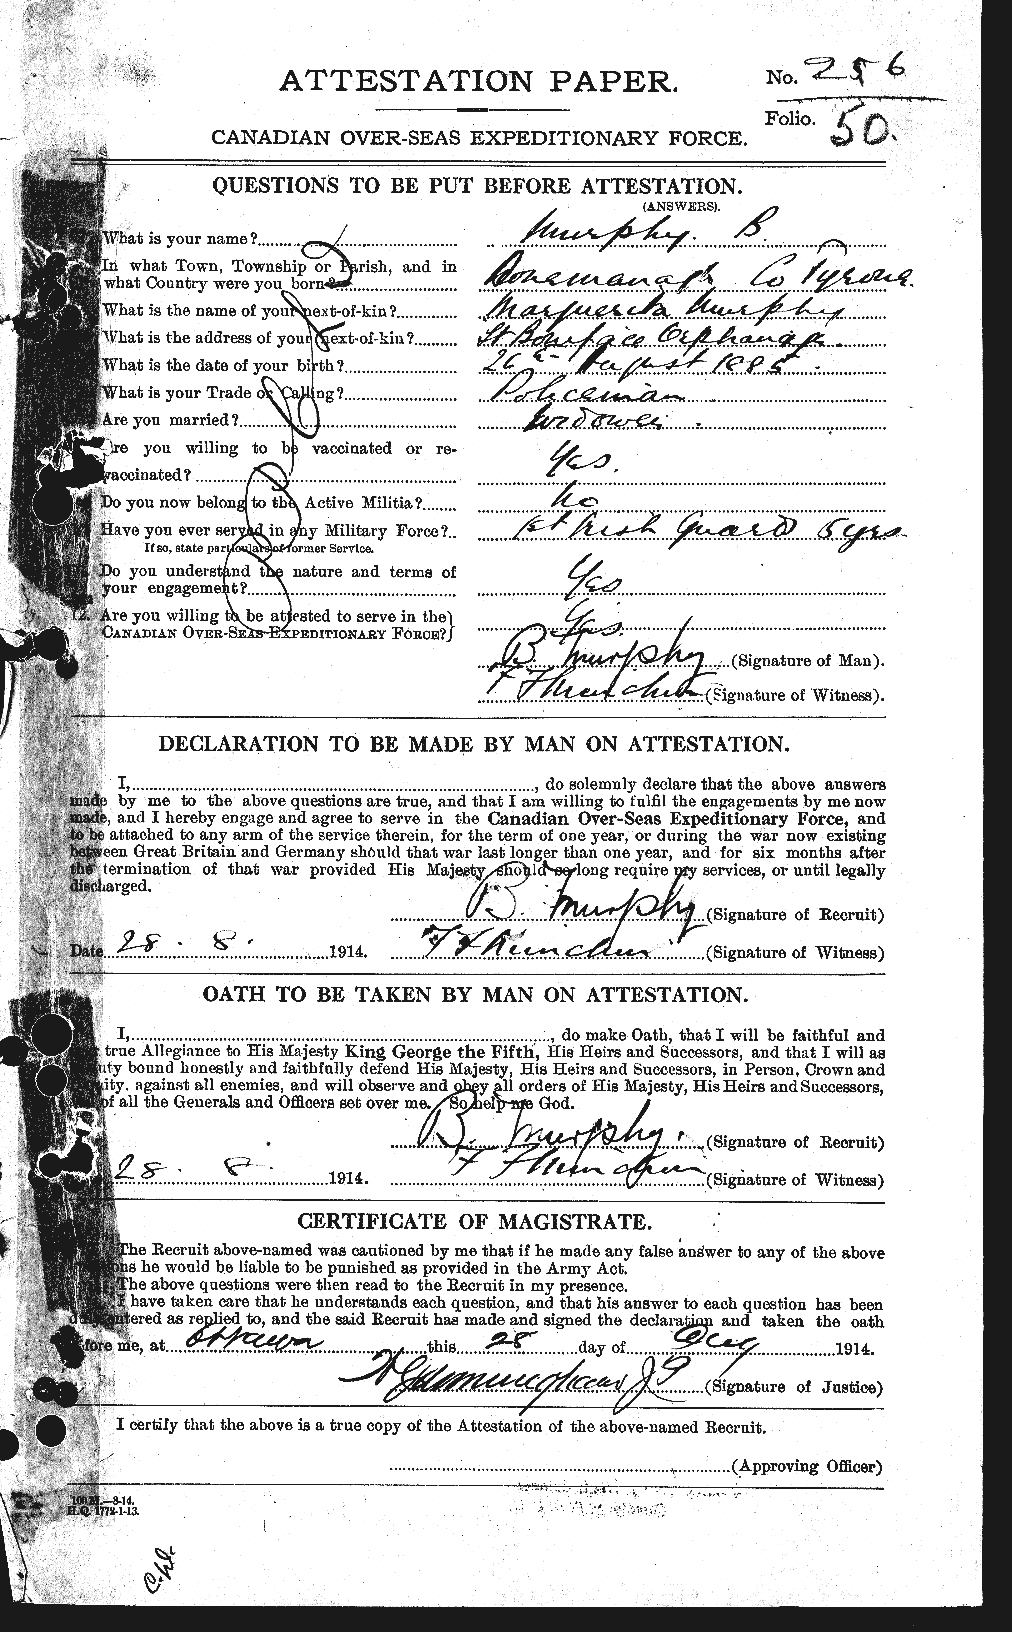 Personnel Records of the First World War - CEF 512686a